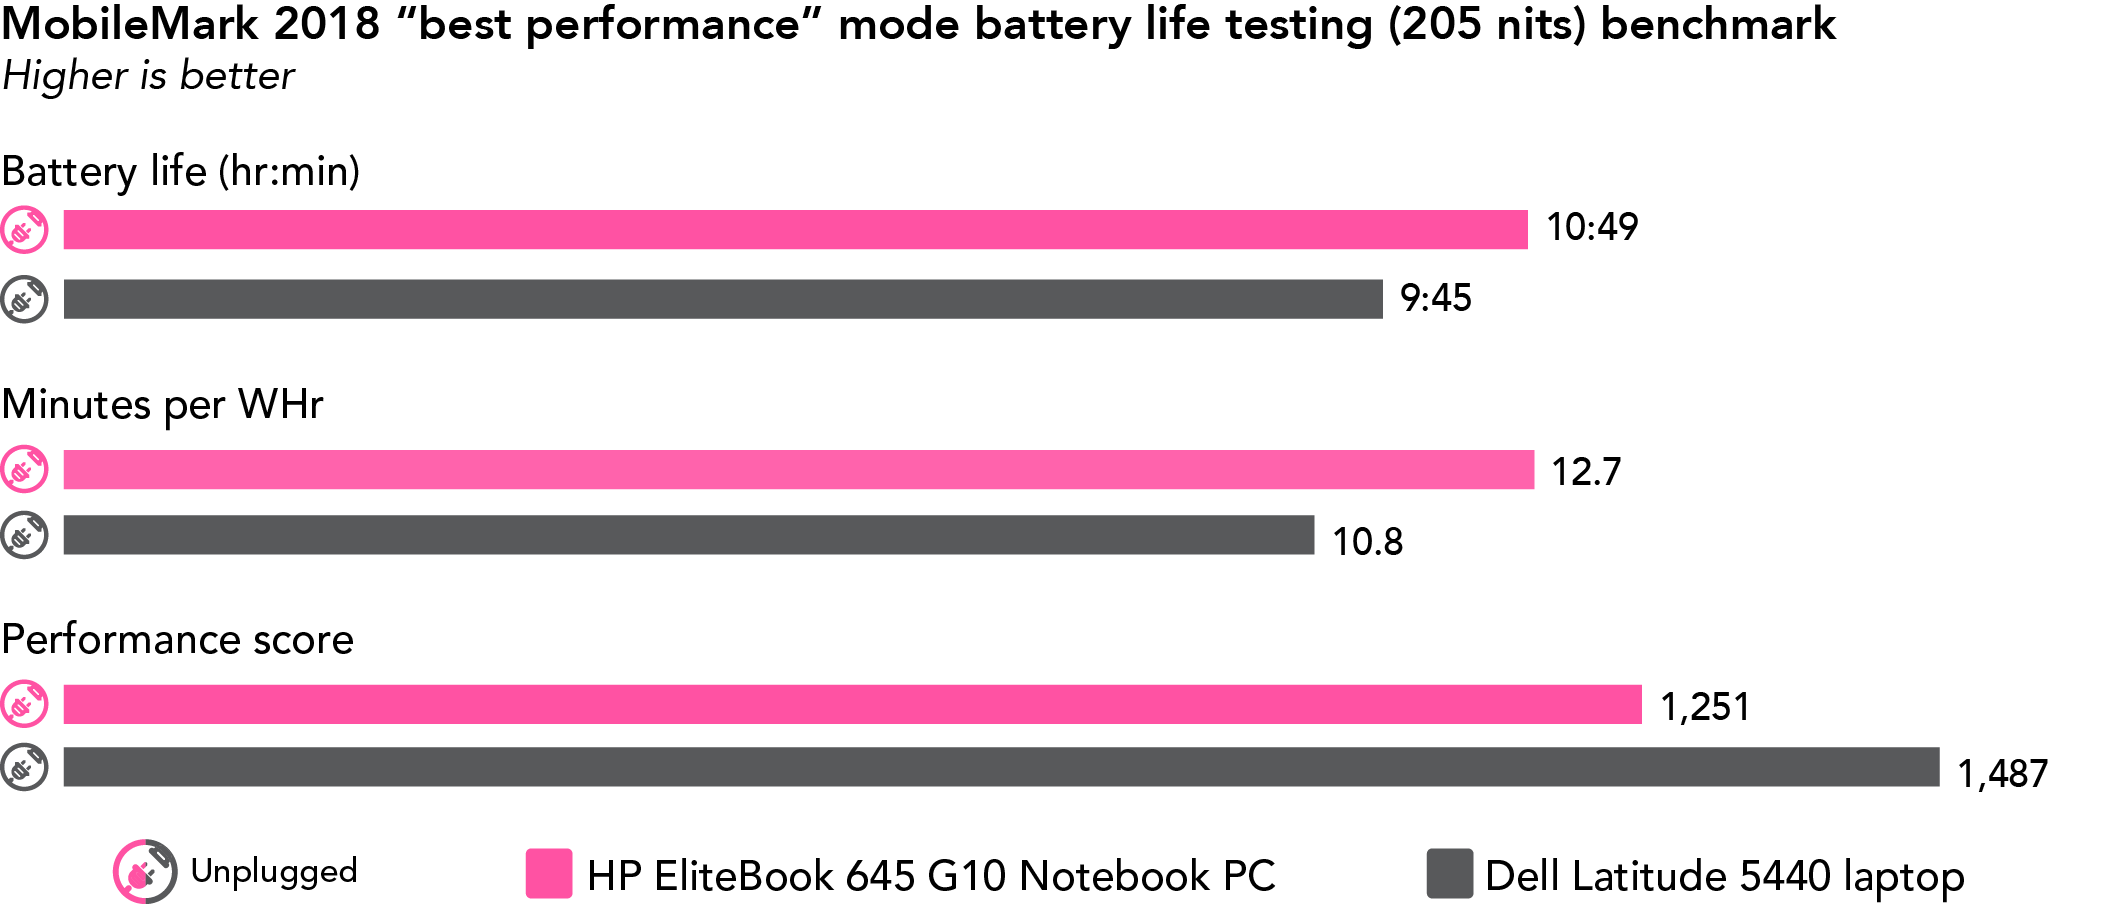 Chart of MobileMark 2018 “best performance” mode battery life testing (205 nits) benchmark results. Higher is better. HP EliteBook 645 G10 Notebook PC has 10 hours and 49 minutes of battery life, 12.7 minutes per WHr, and a 1,251 performance score. Dell Latitude 5440 laptop has 9 hours and 45 minutes of battery life, 10.8 minutes per WHr, and a 1,487 performance score.